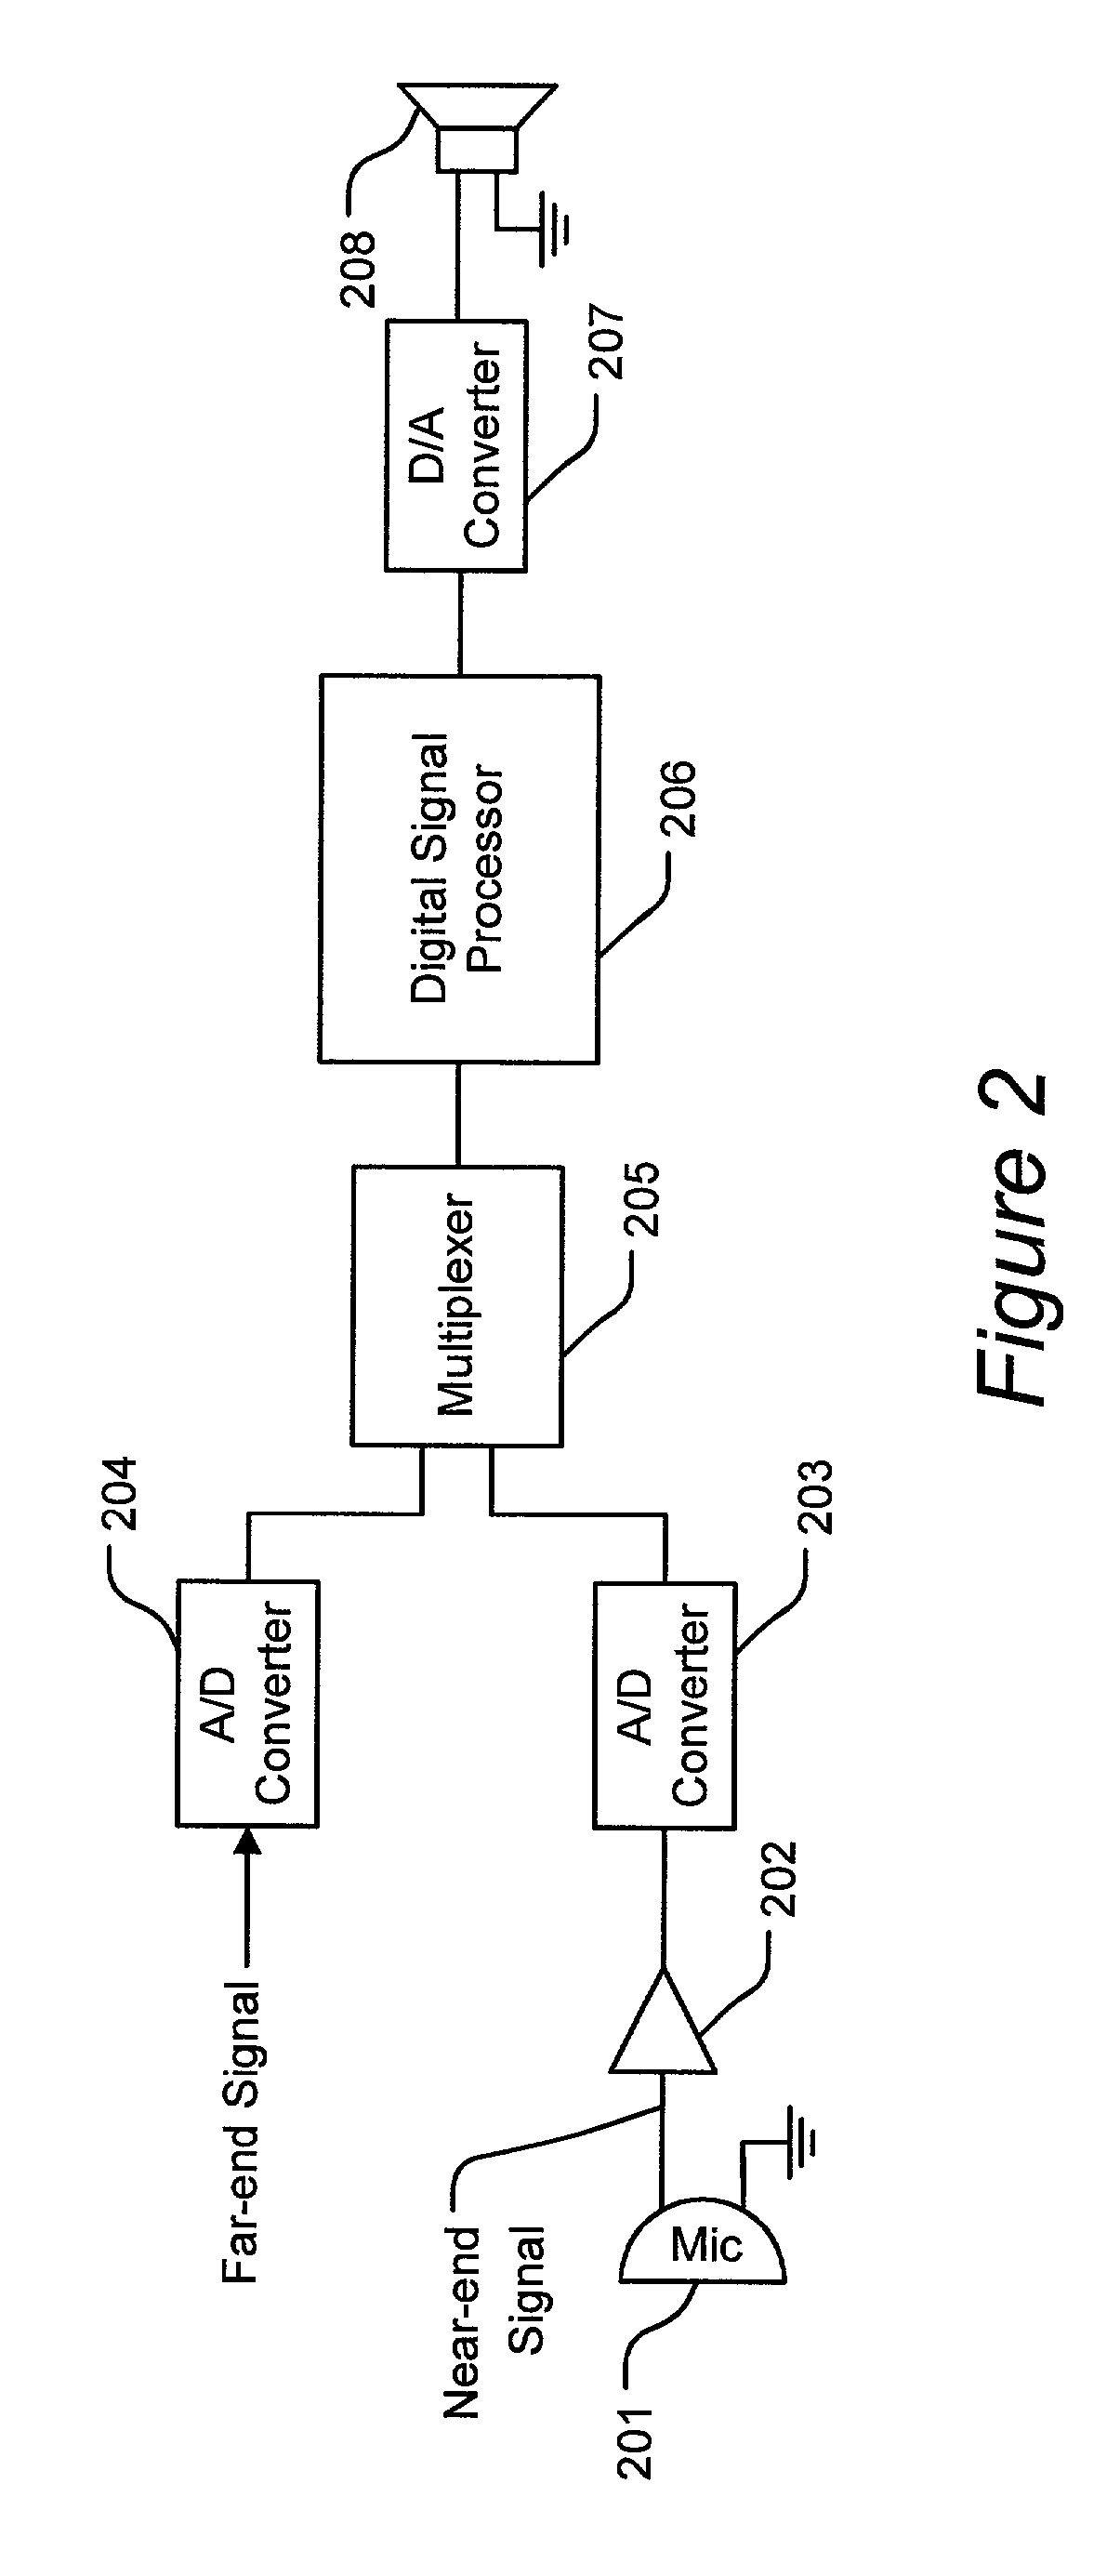 Method for generating a final signal from a near-end signal and a far-end signal